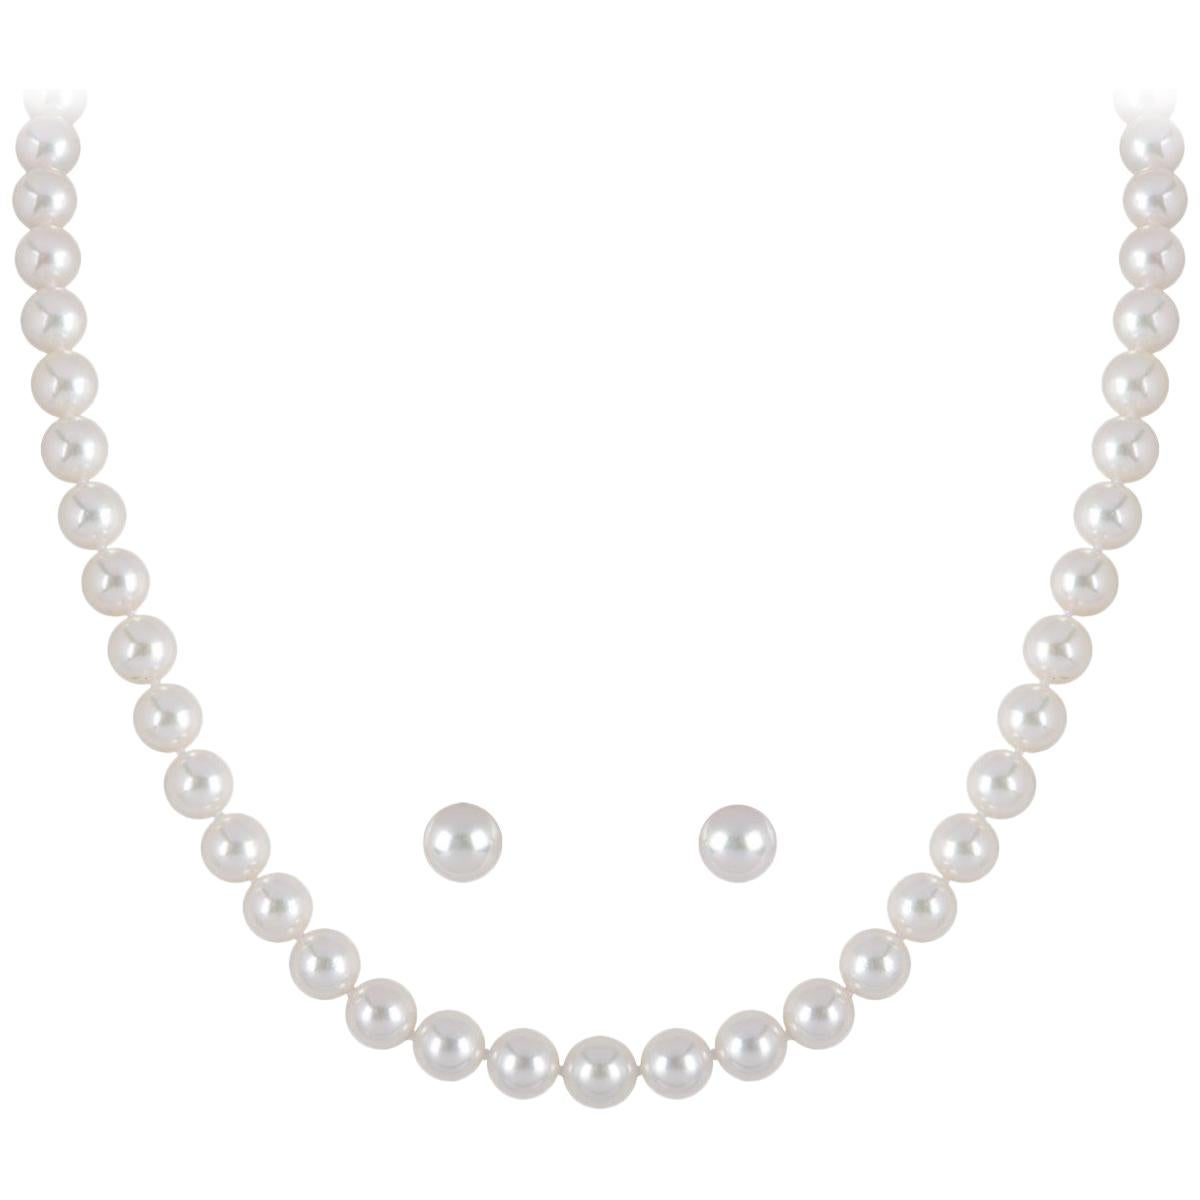 Mikimoto Diamond and Pearl Earrings and Necklace